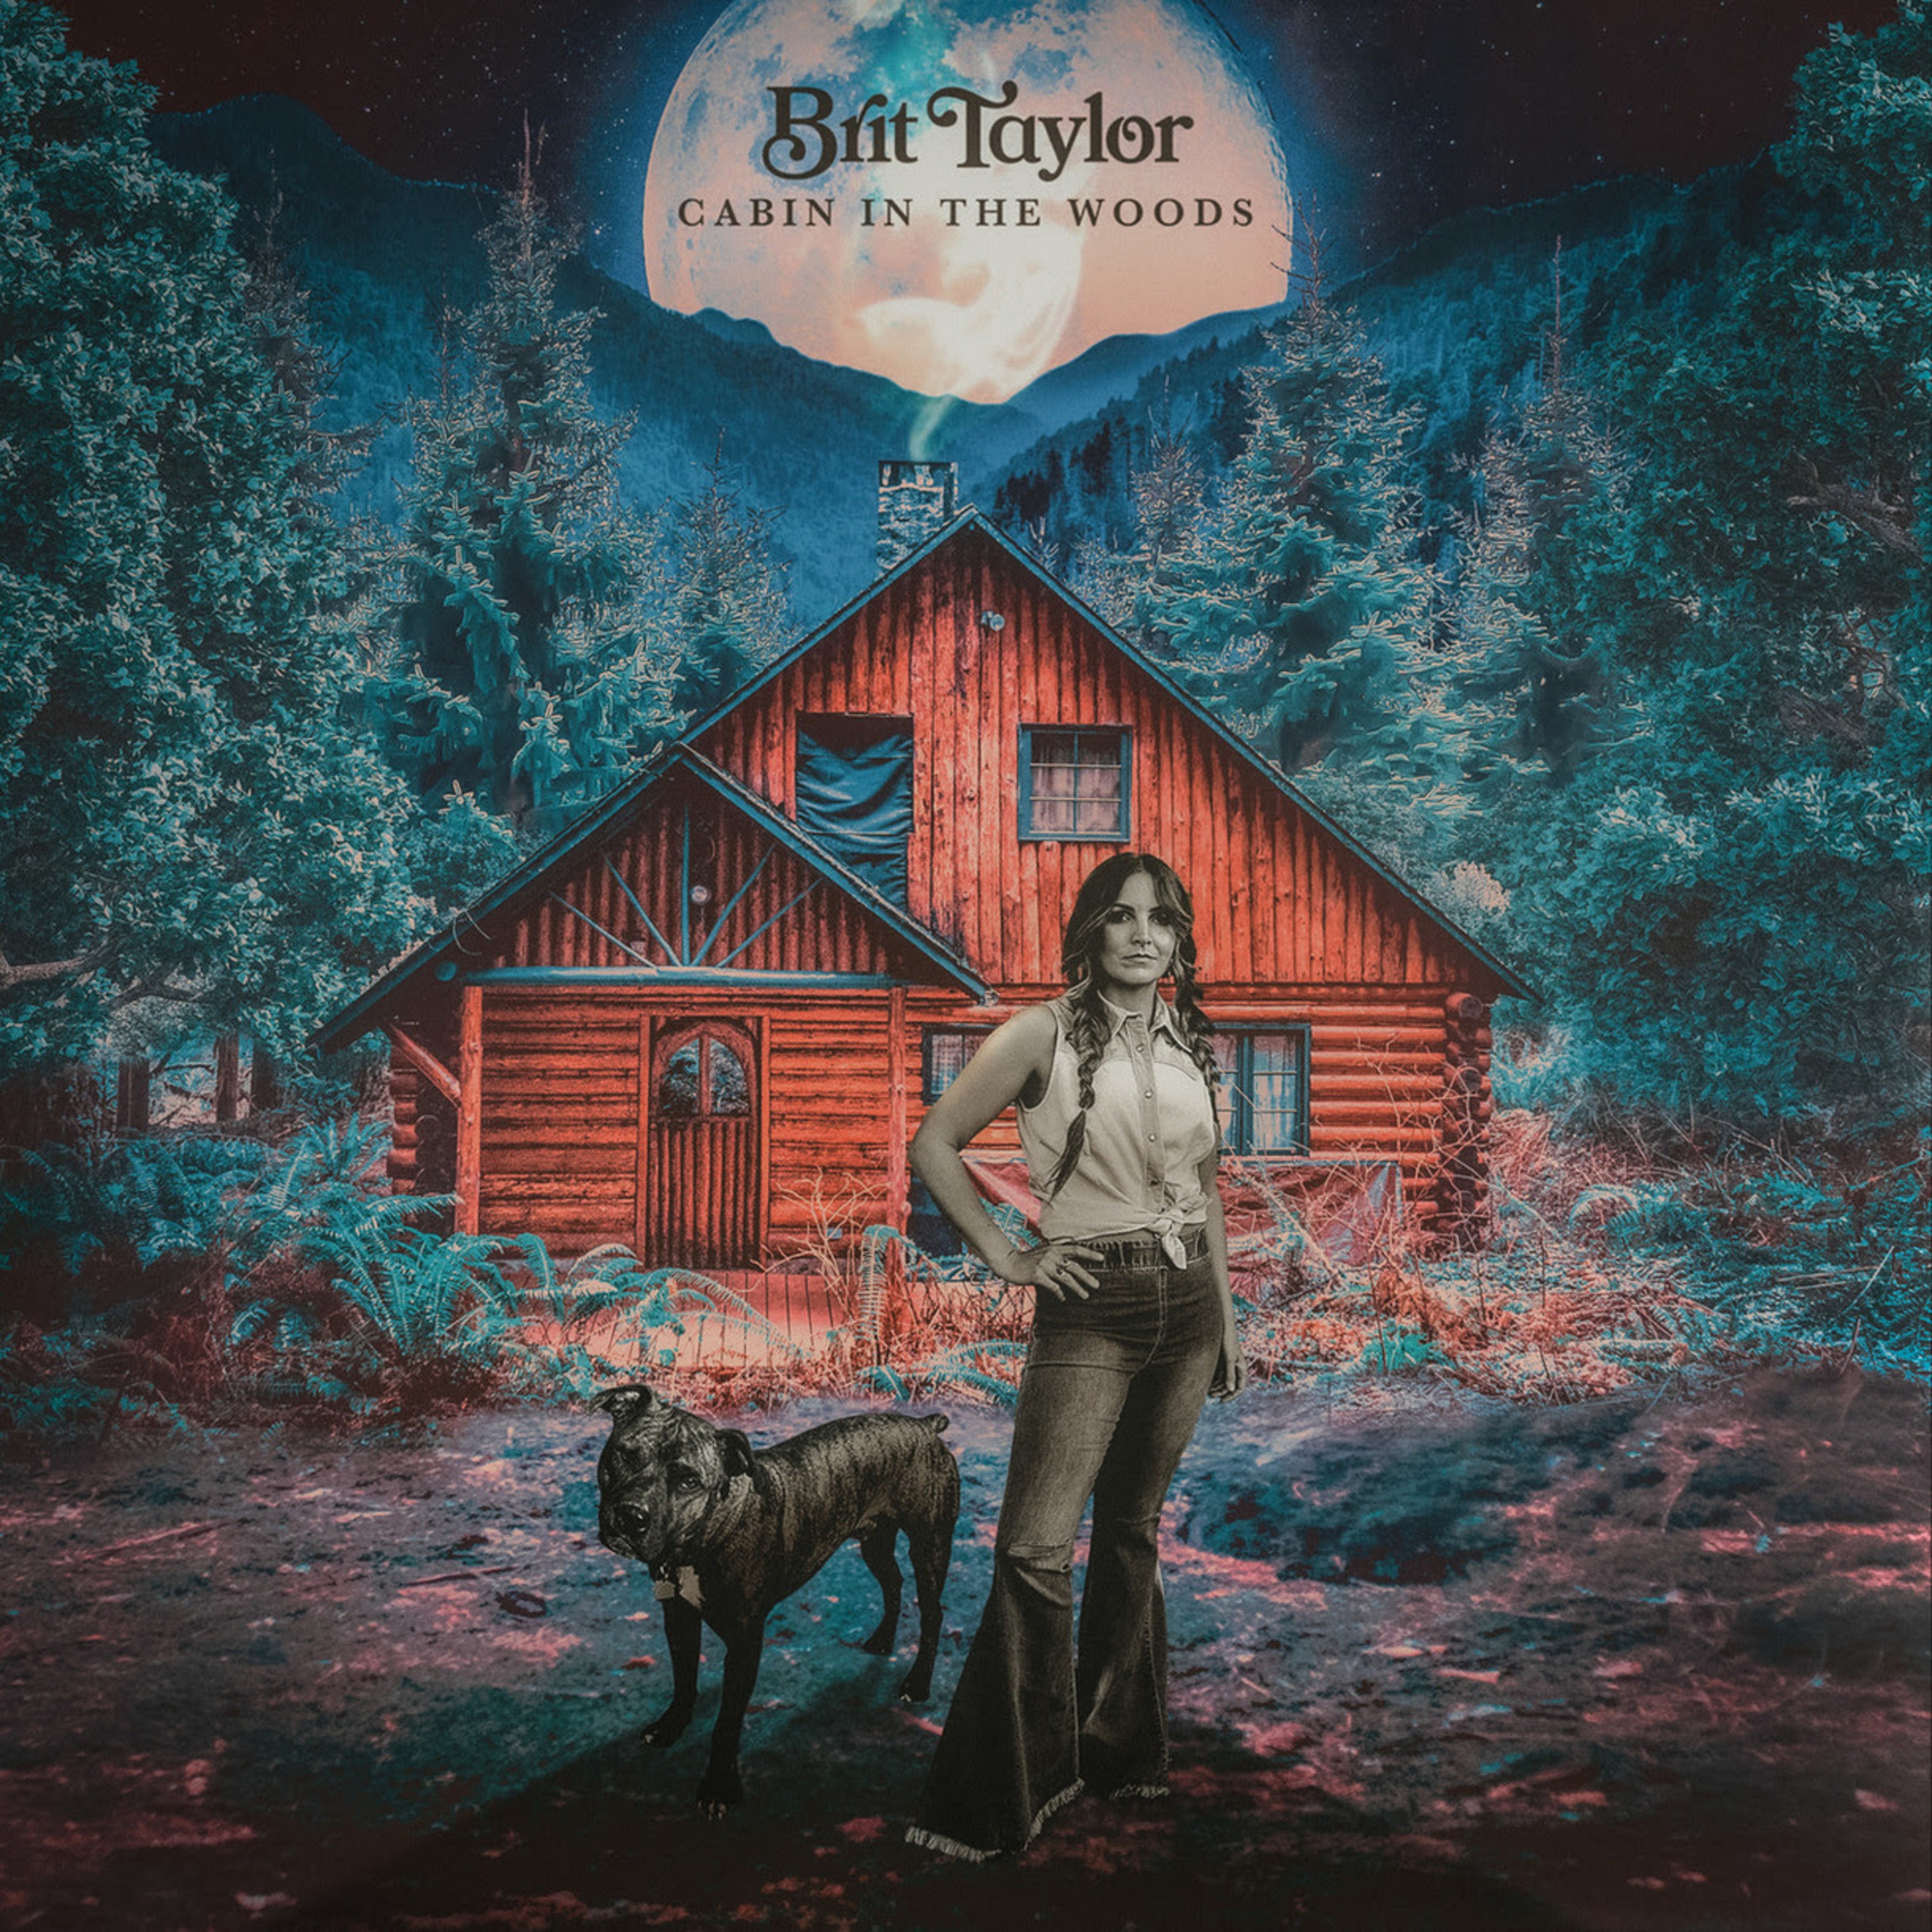 BRIT TAYLOR’S NEW SINGLE “CABIN IN THE WOODS,” PRODUCED BY GRAMMY-AWARD WINNERS STURGILL SIMPSON AND DAVID FERGUSON, AVAILABLE NOW